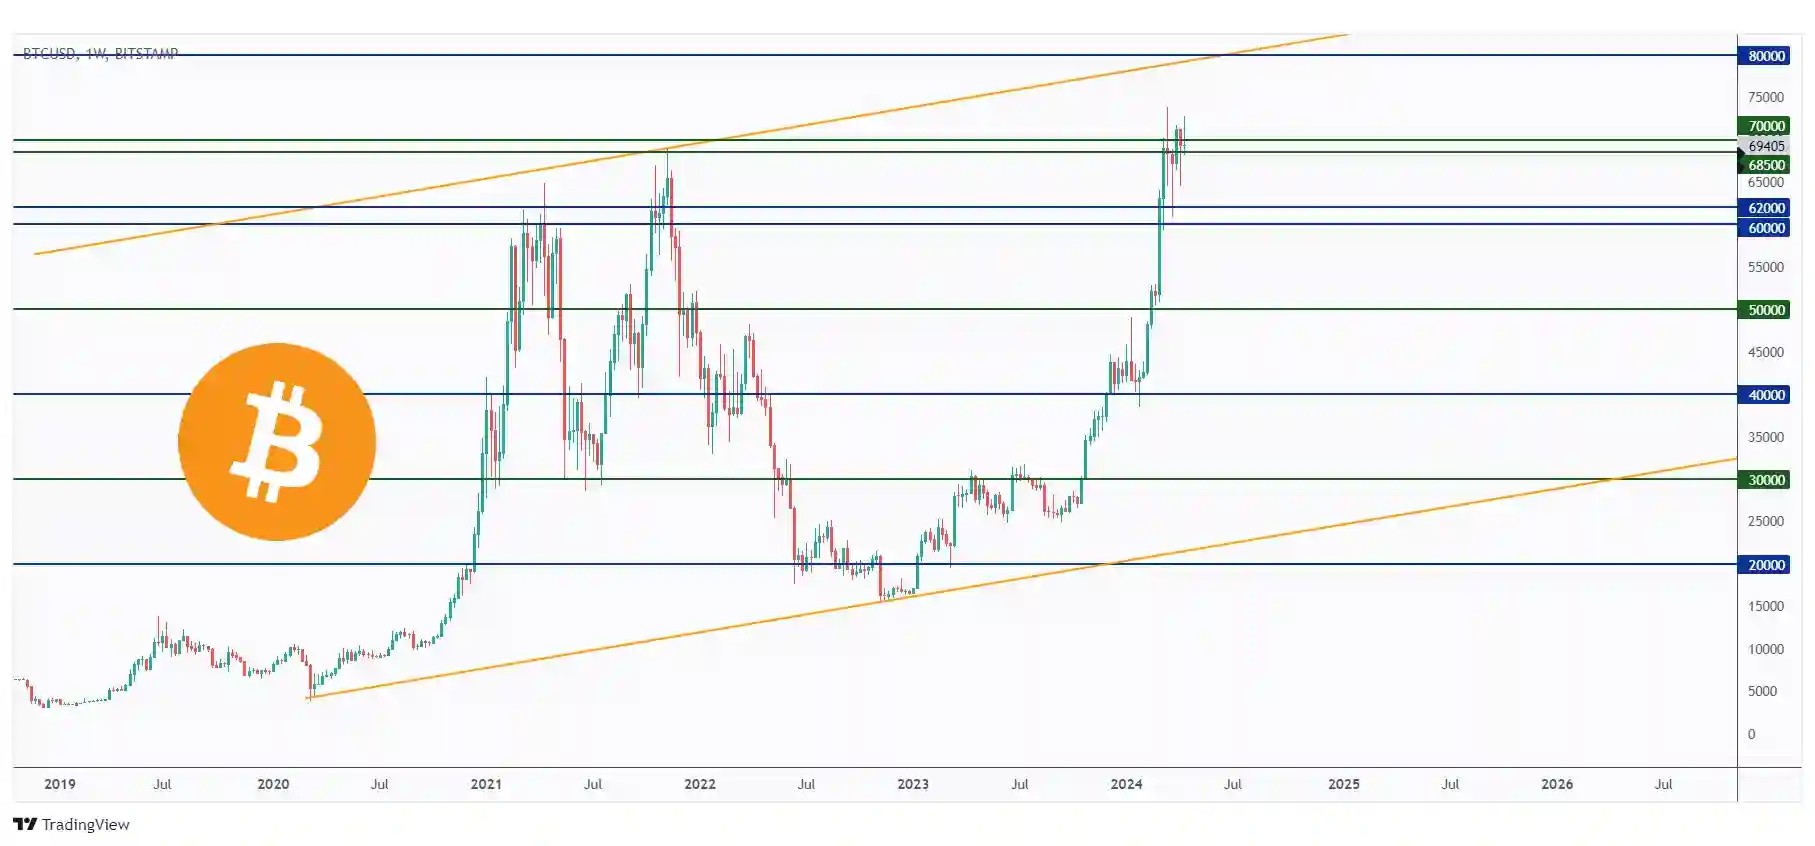 BTC WEEKLY chart still hovering around a strong resistance at $70,000.